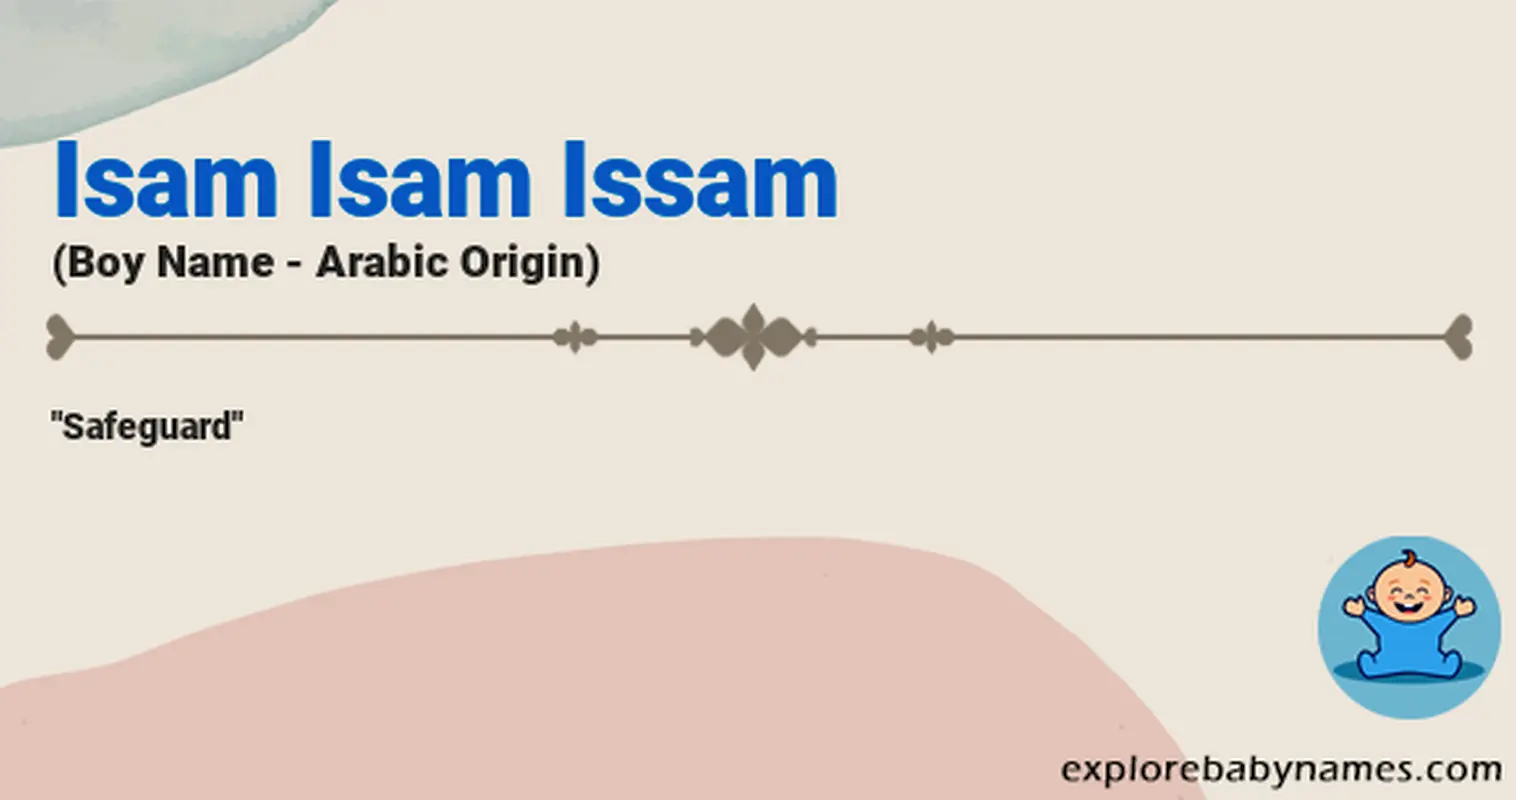 Meaning of Isam Isam Issam